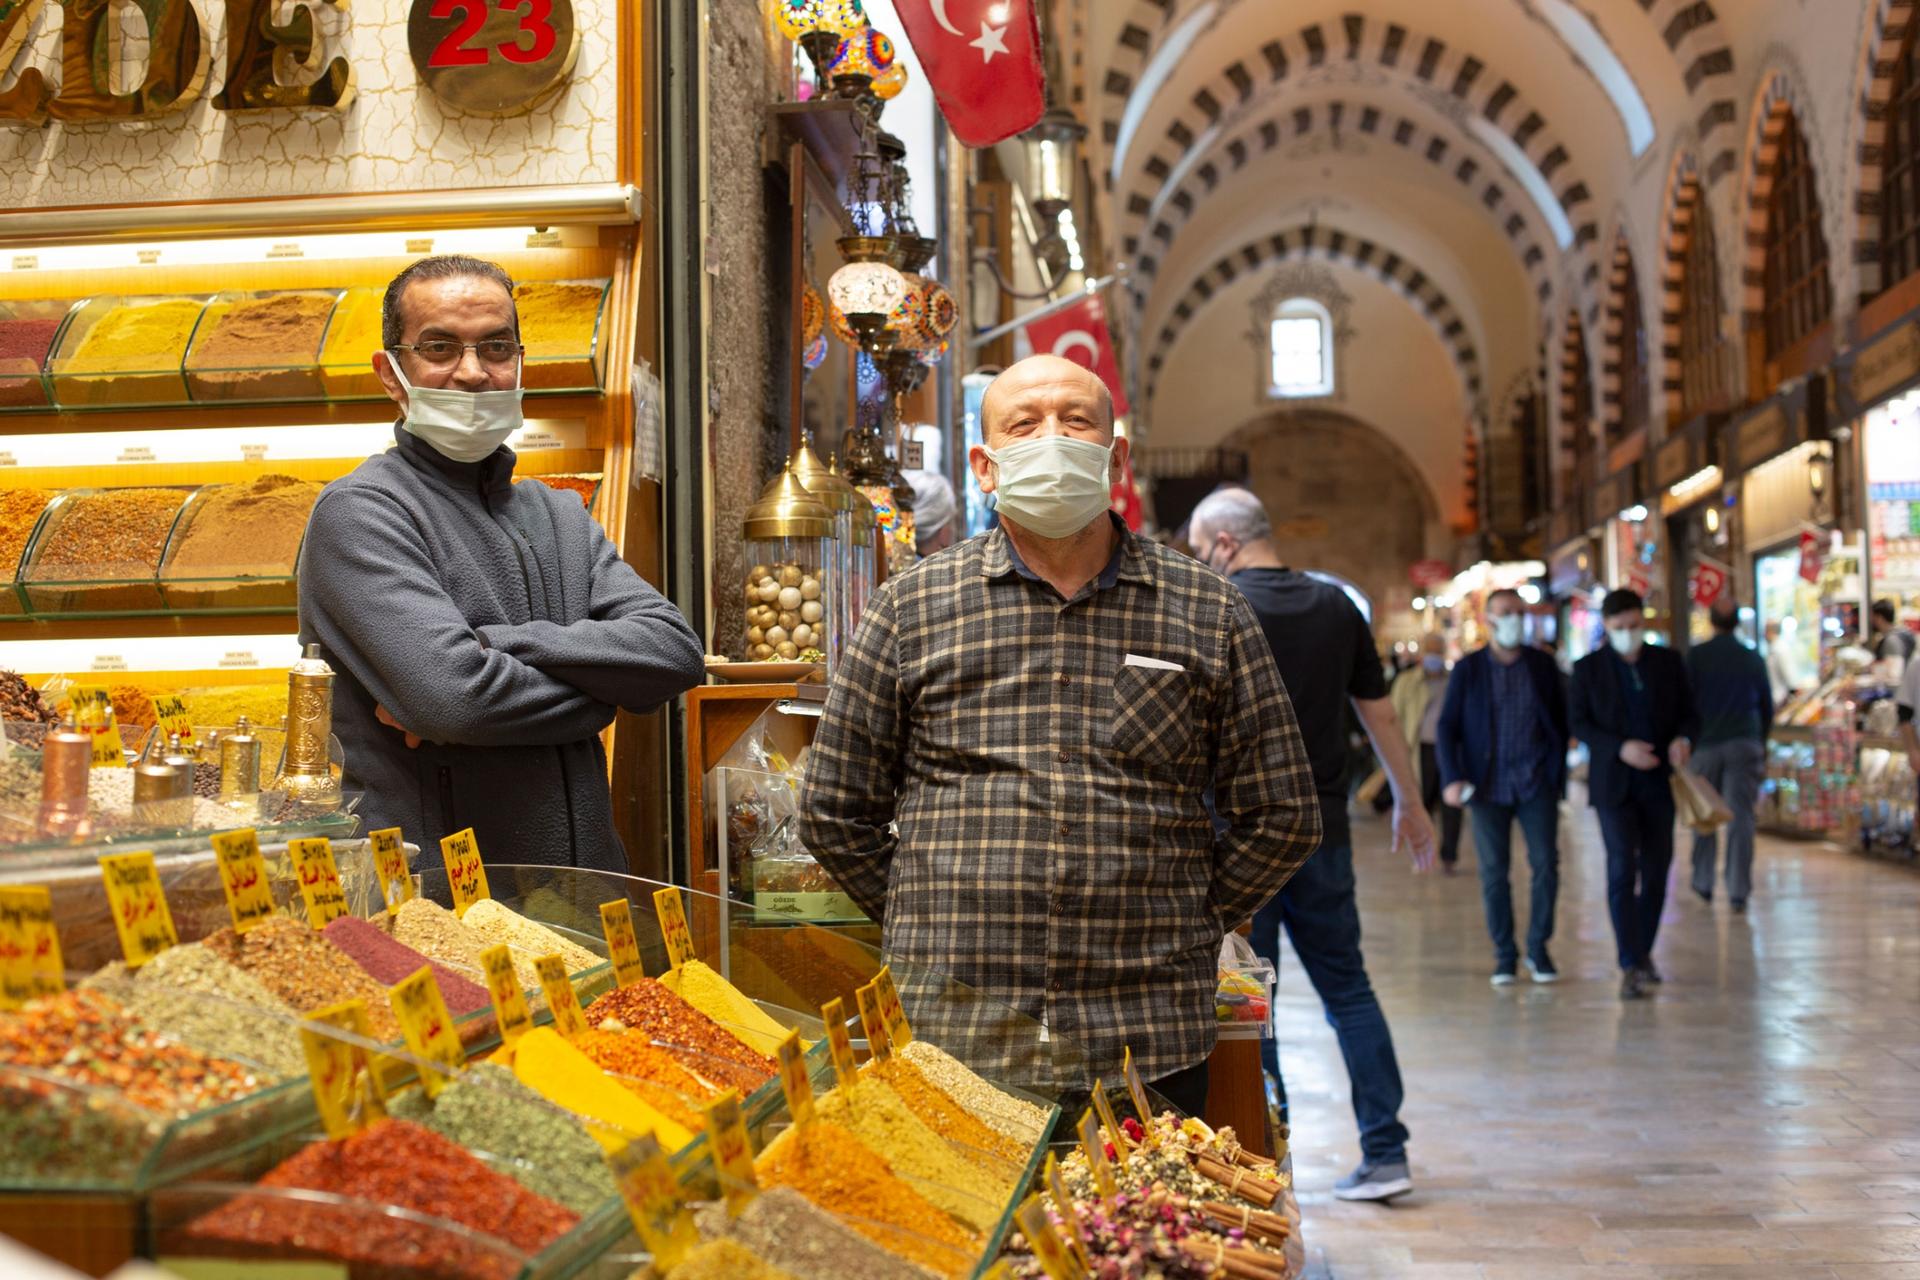 Two men are shown wearing face masks and standing next to a large display of sweets.